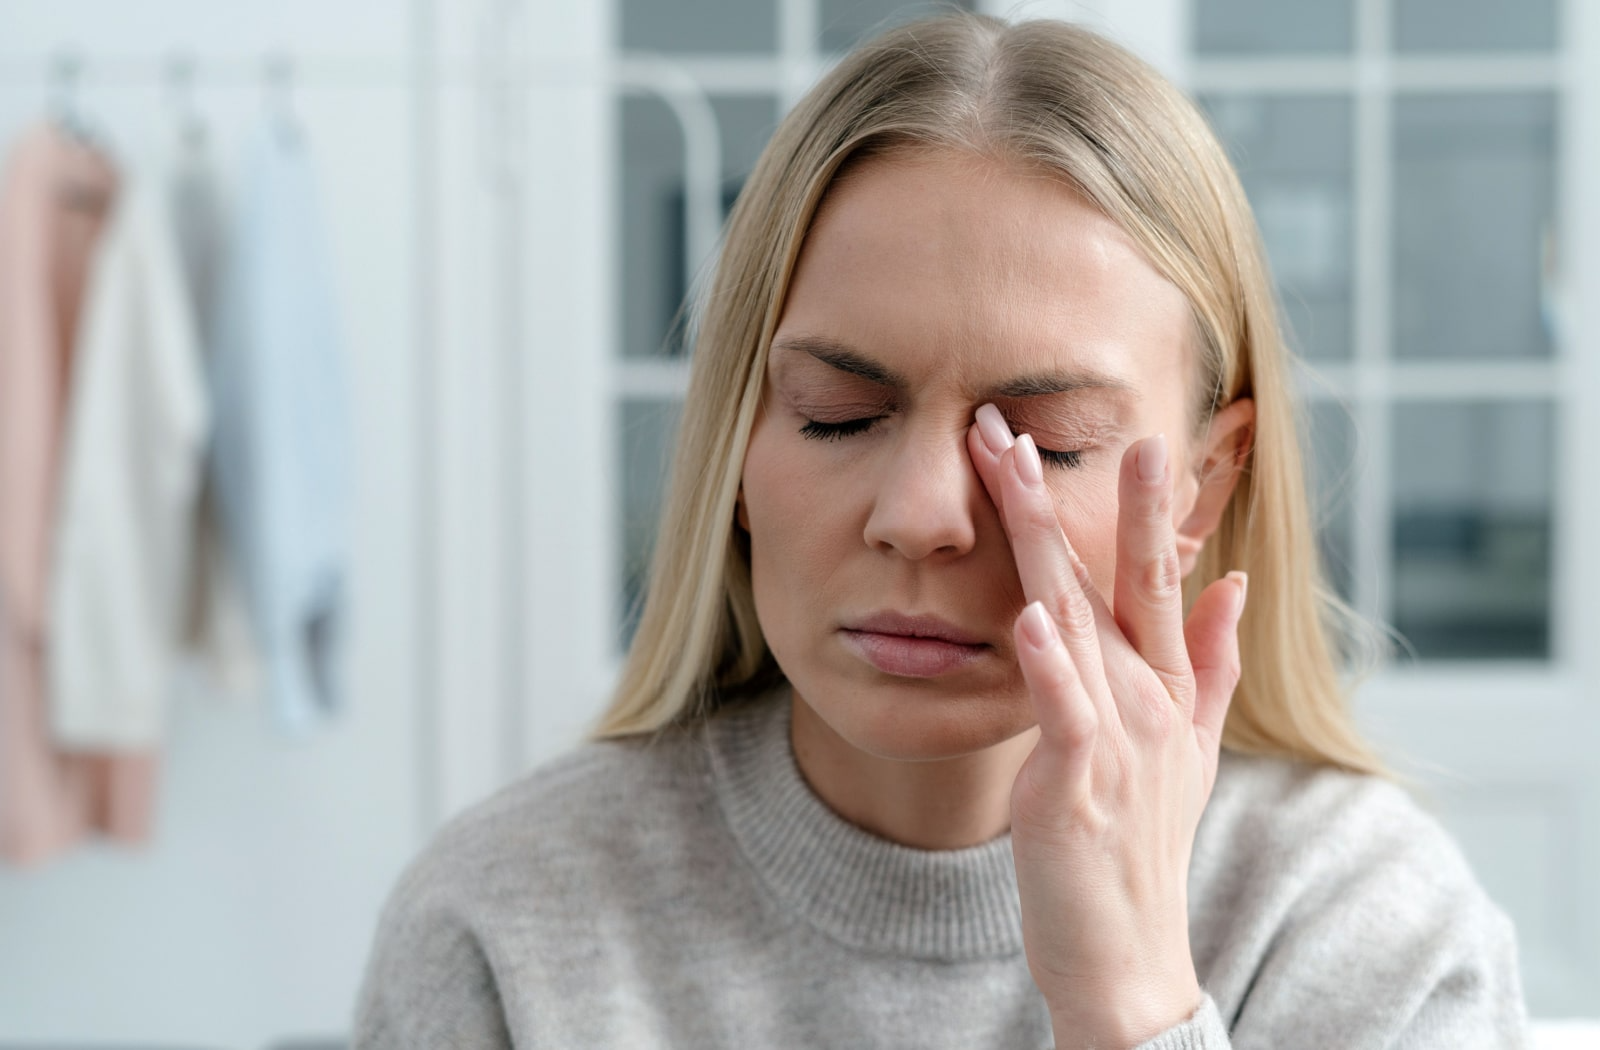 A woman holds her index finger near her eyes due to dry eye pain